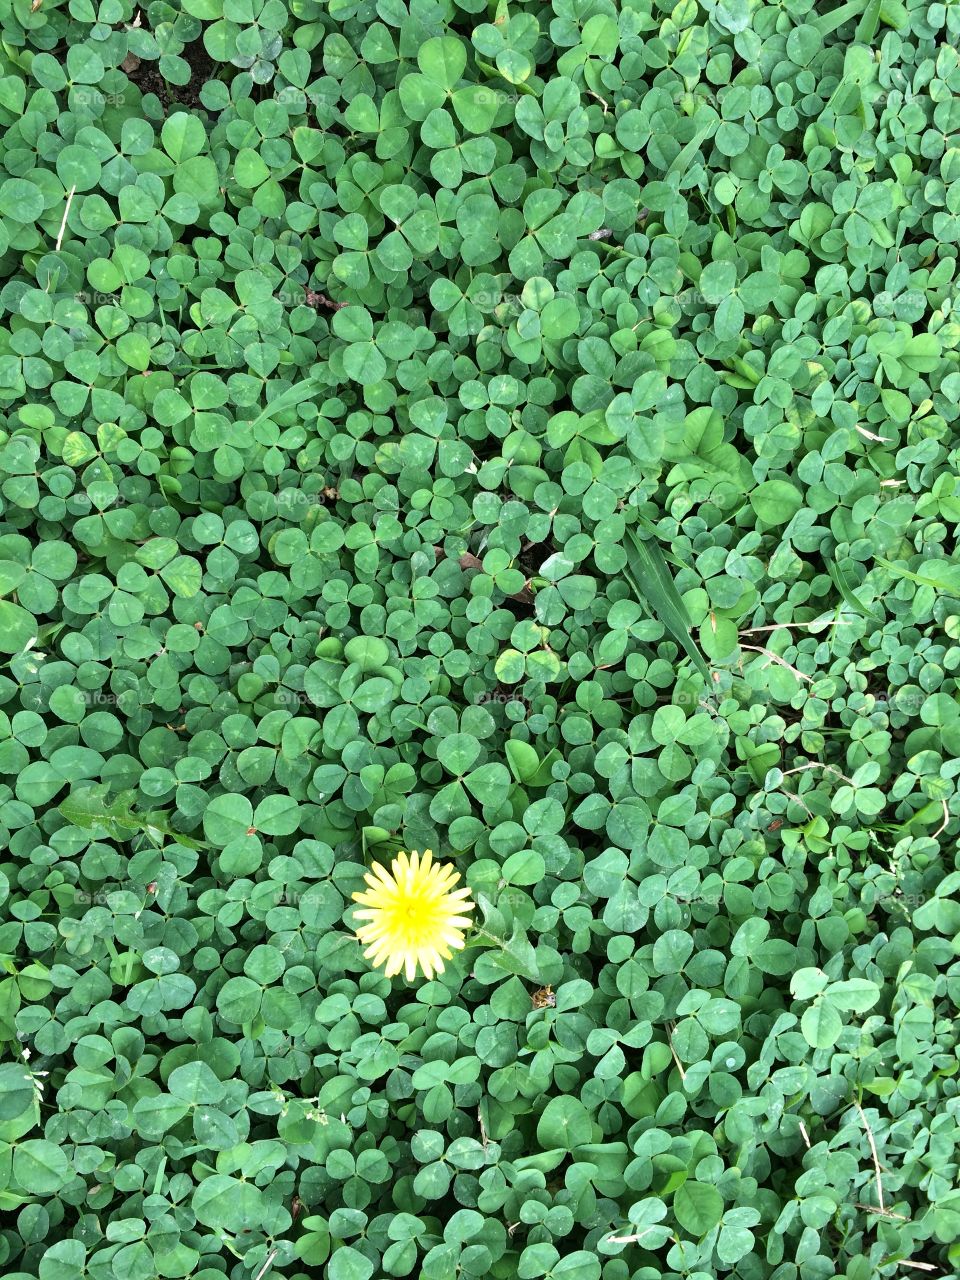 Stand out. A lone dandelion amongst the clover